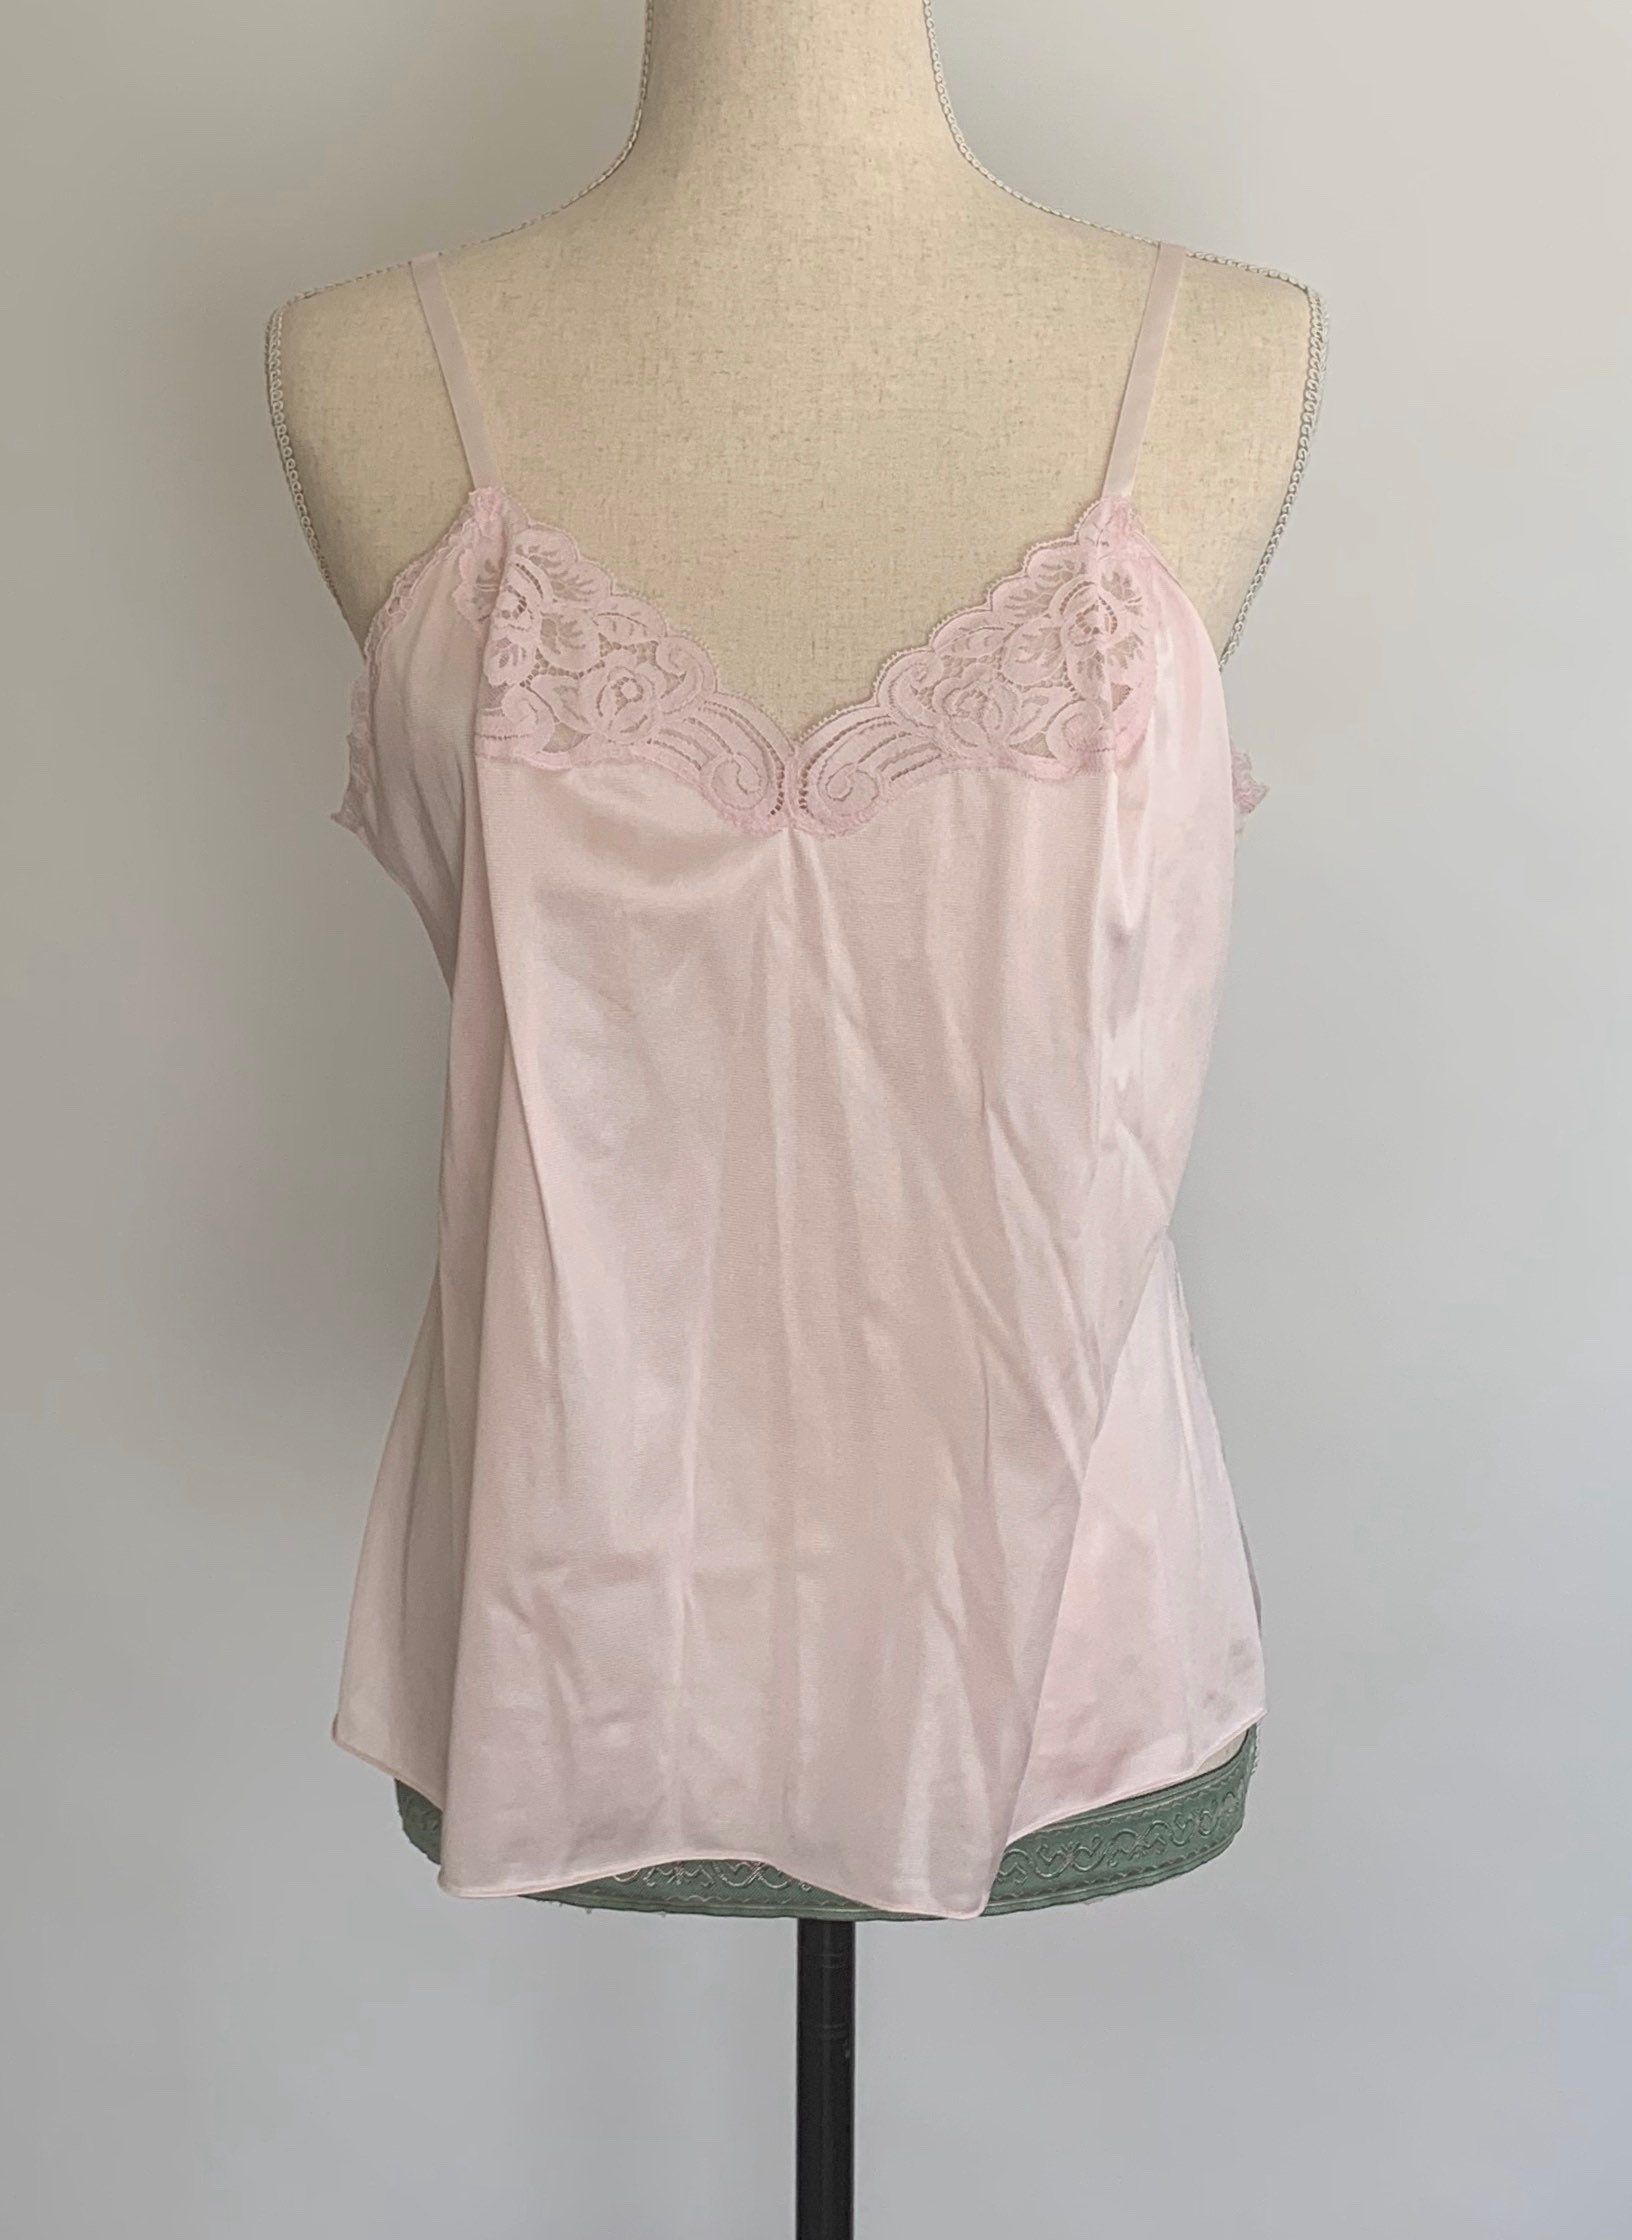 Pale Pink Nylon Camisole Top Nightie Vintage 60s Pale Pink Lace ...